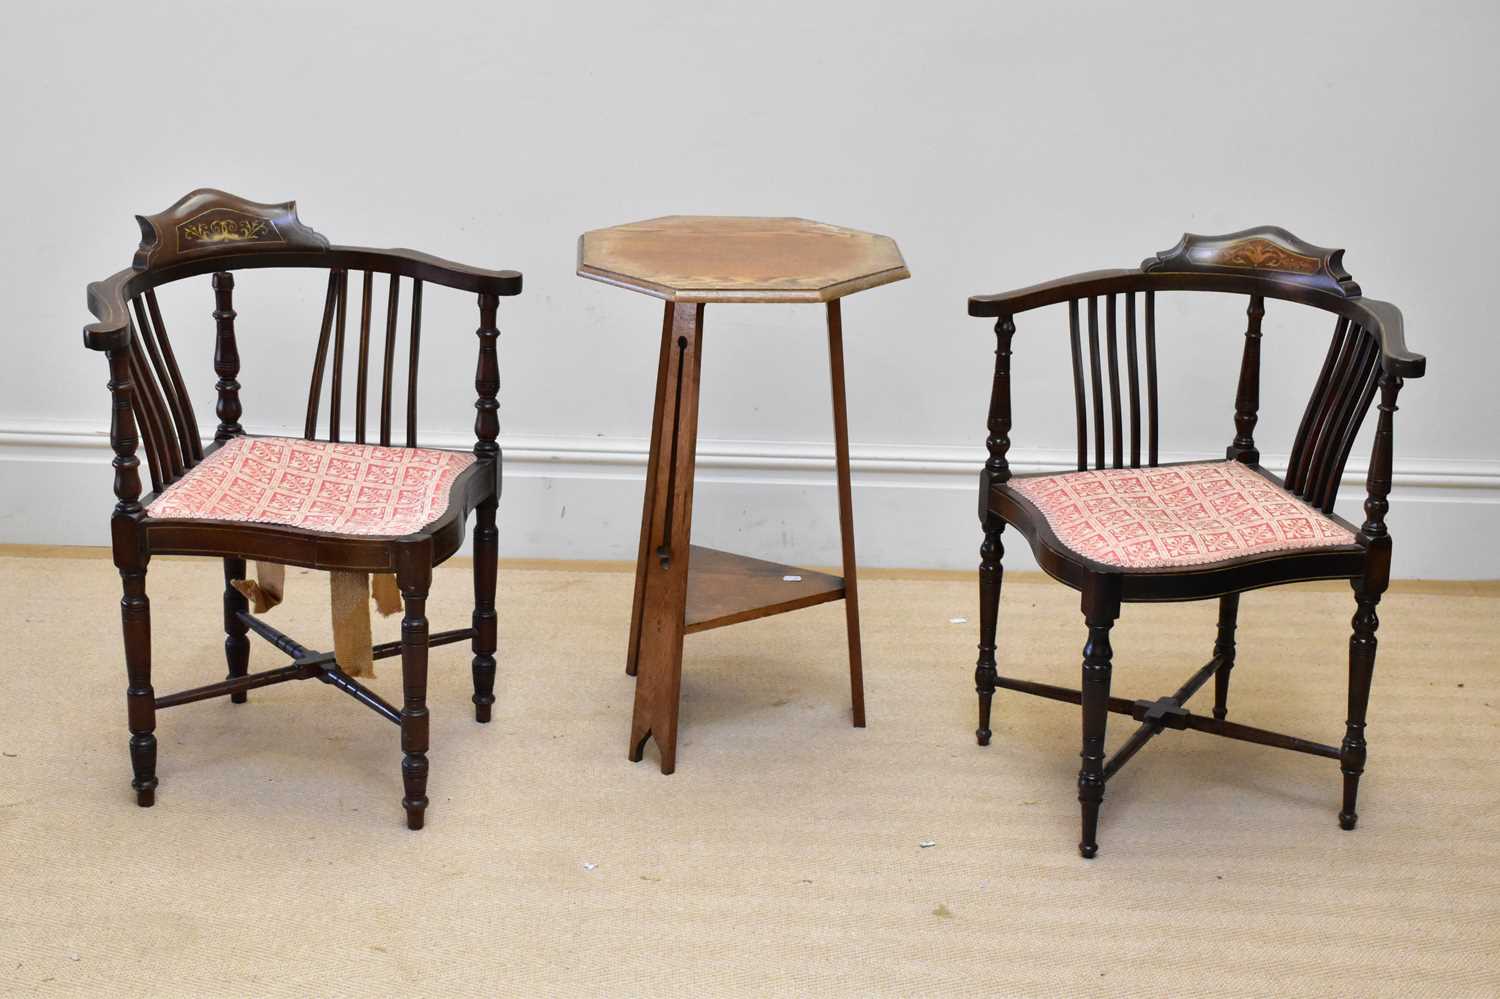 A pair of Edwardian inlaid mahogany corner chairs on turned column legs and an oak Arts and Crafts